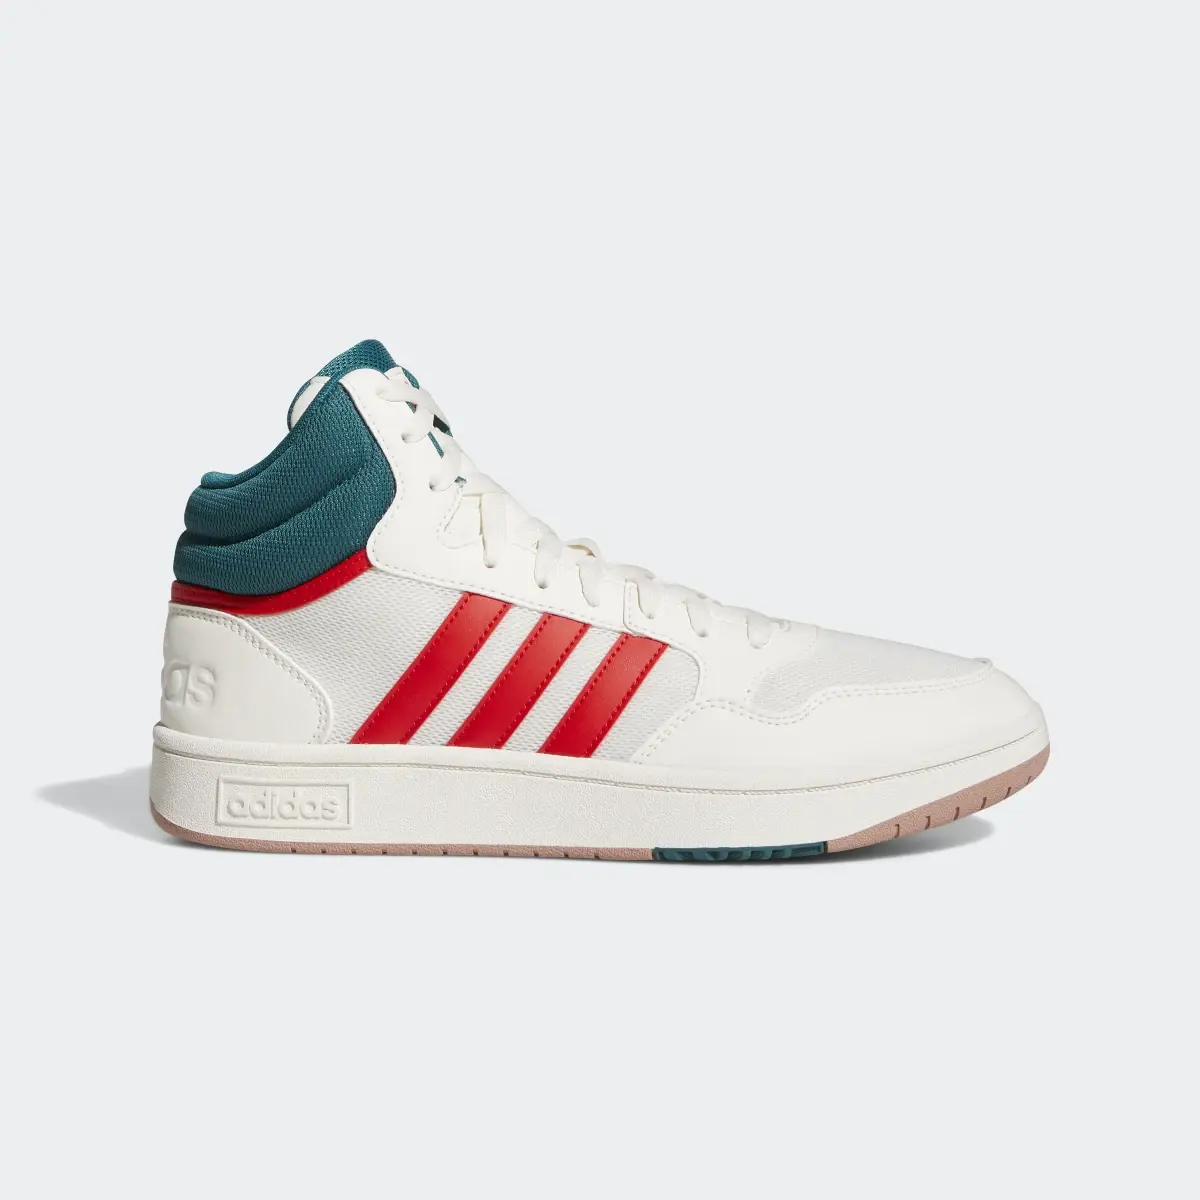 Adidas Hoops 3.0 Mid Shoes. 2